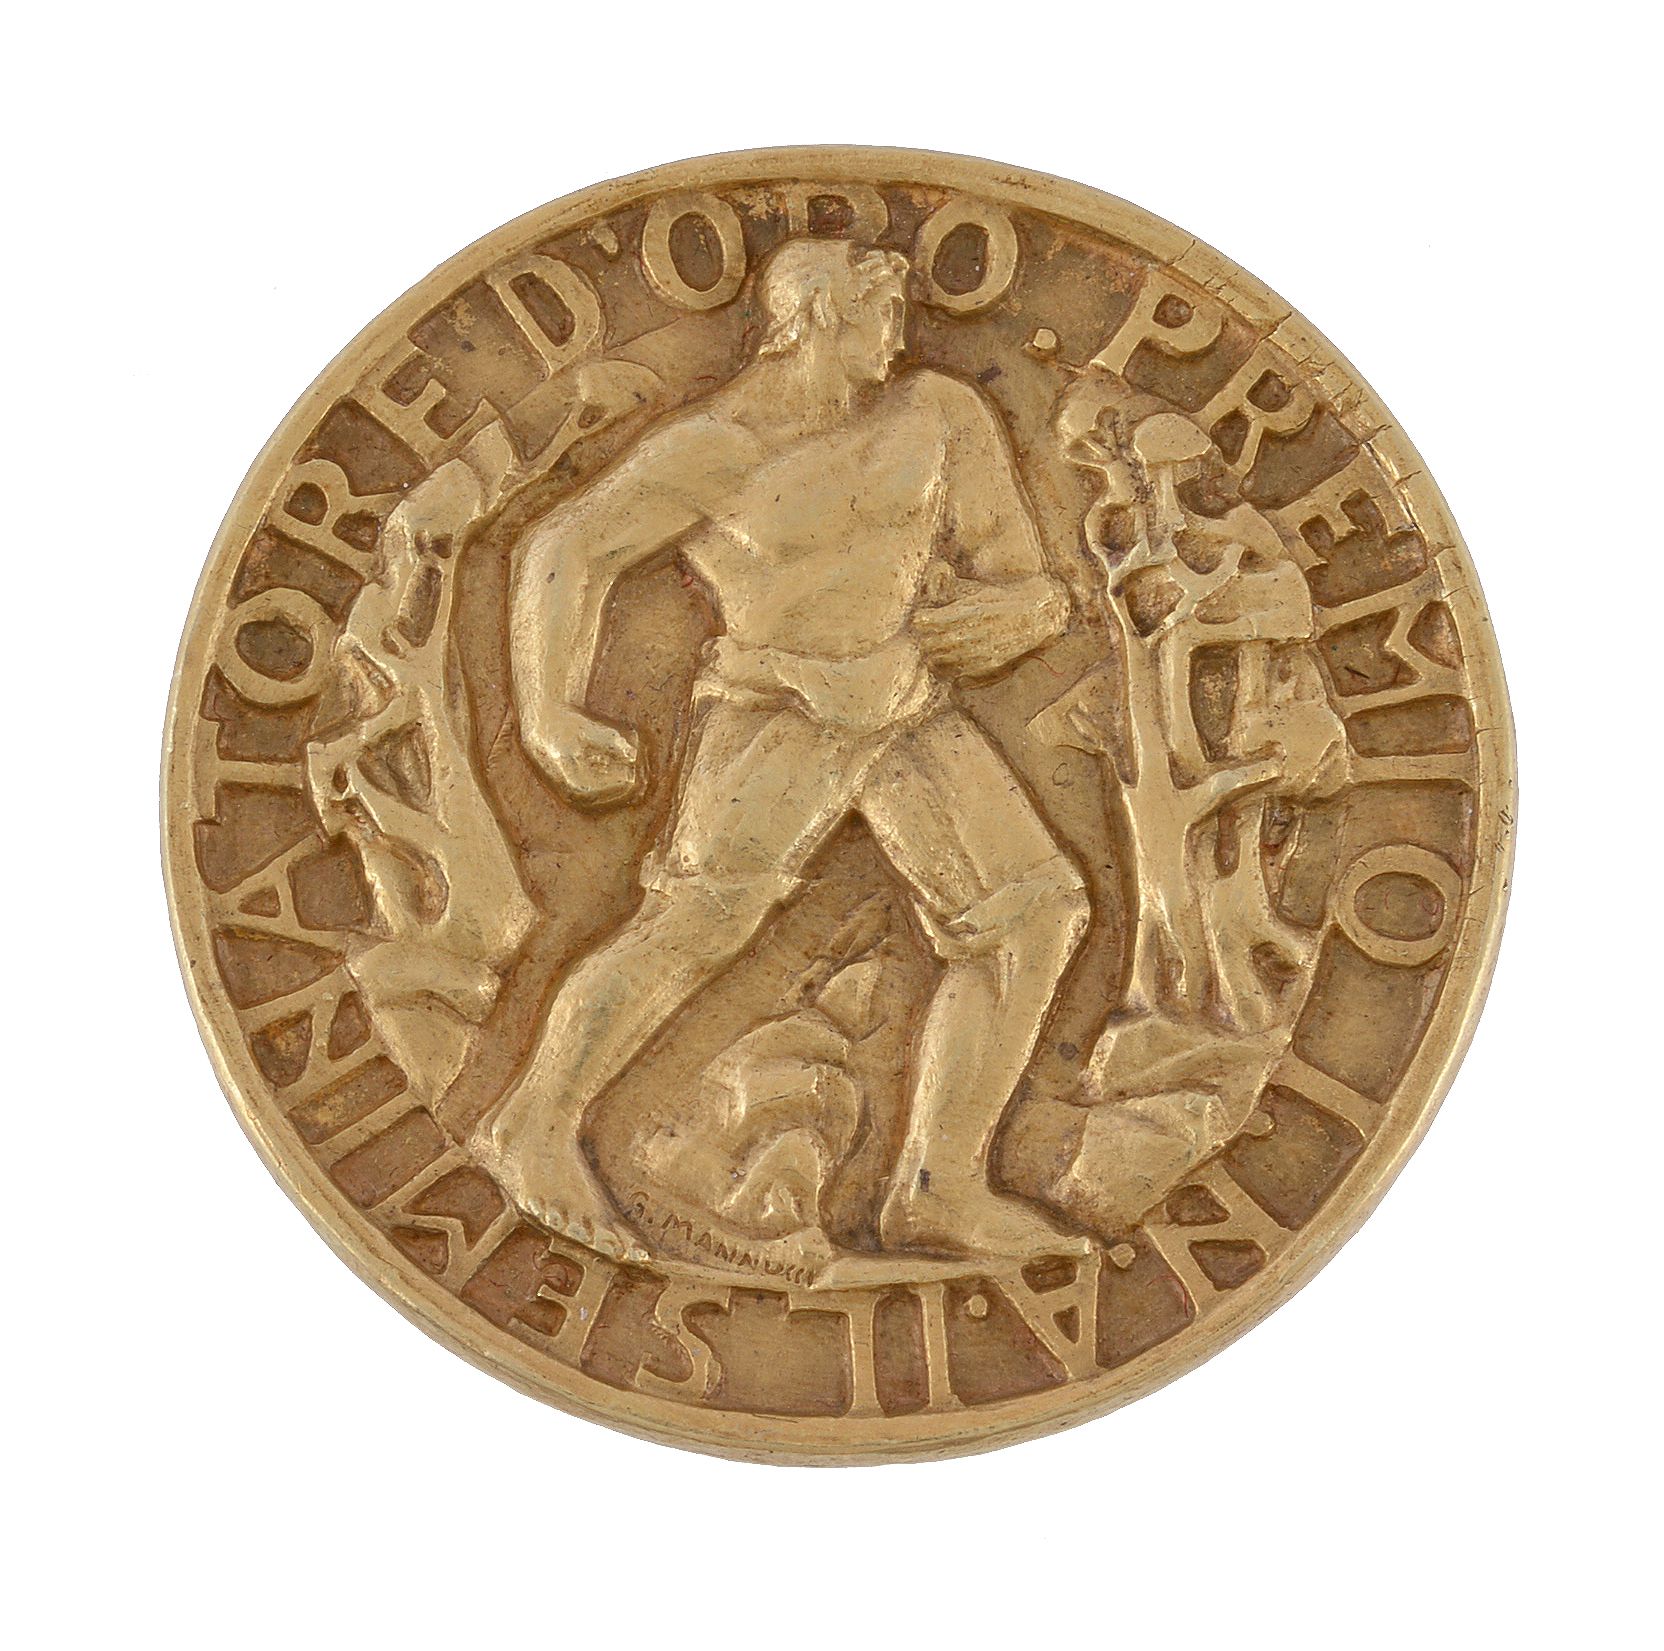 Italy, Istitutona Zionale delle Assicura Zioni, 18 carat gold prize medal by G. Mammussi, strongman